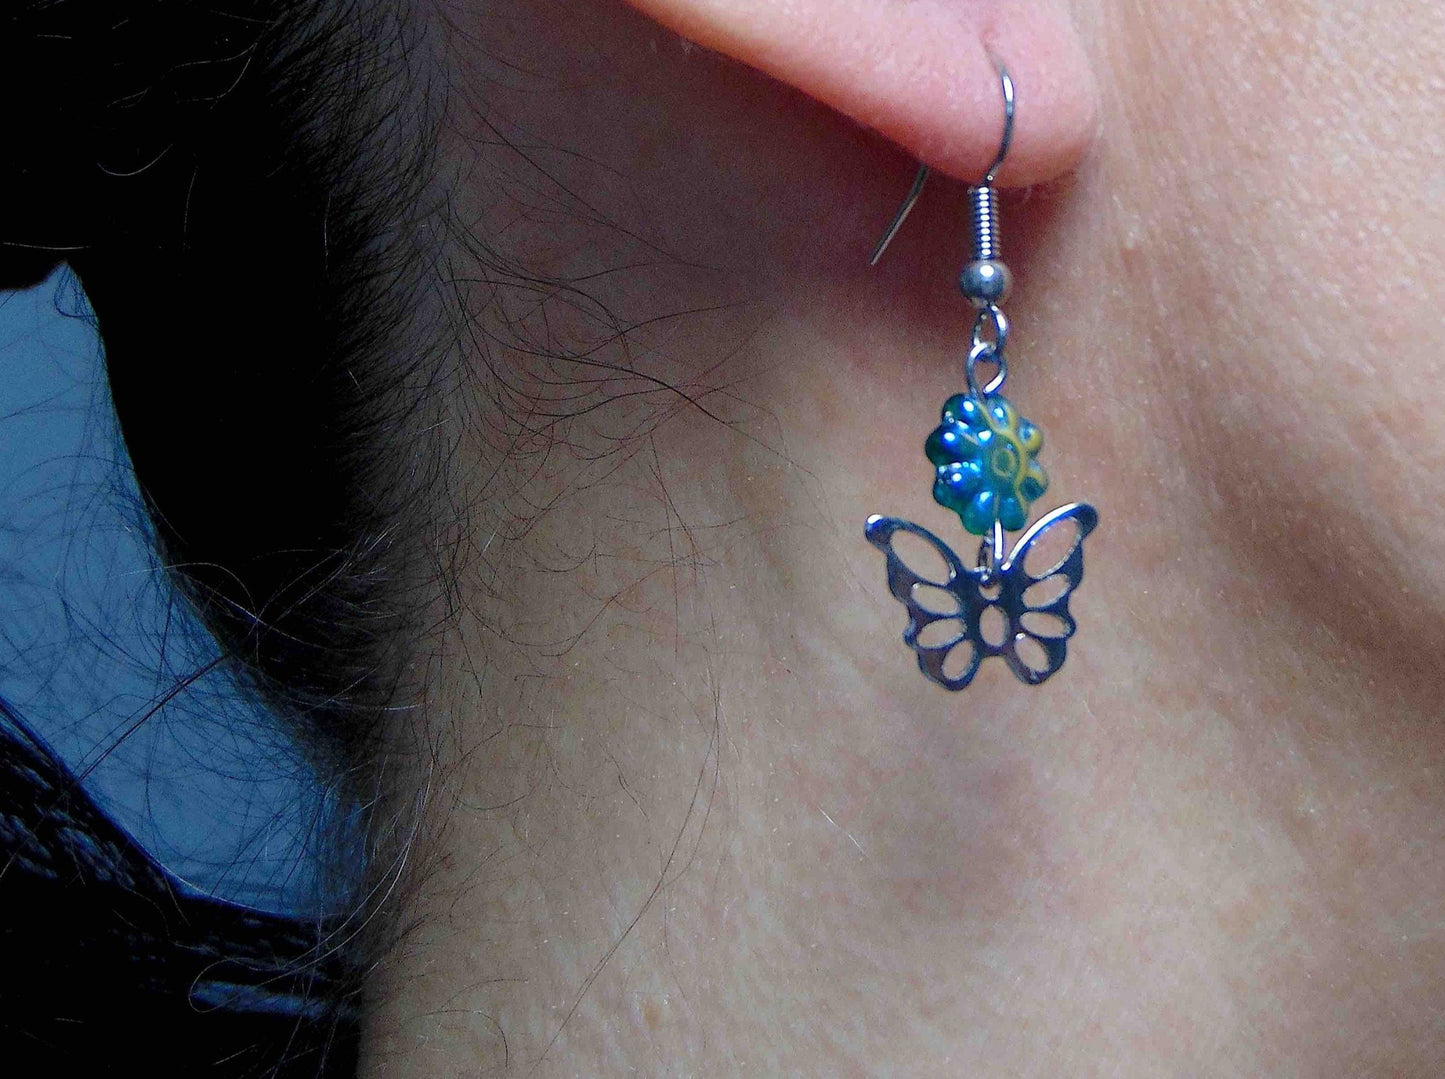 Short earrings with stainless steel butterflies and iridescent green Czech glass flowers, stainless steel hooks